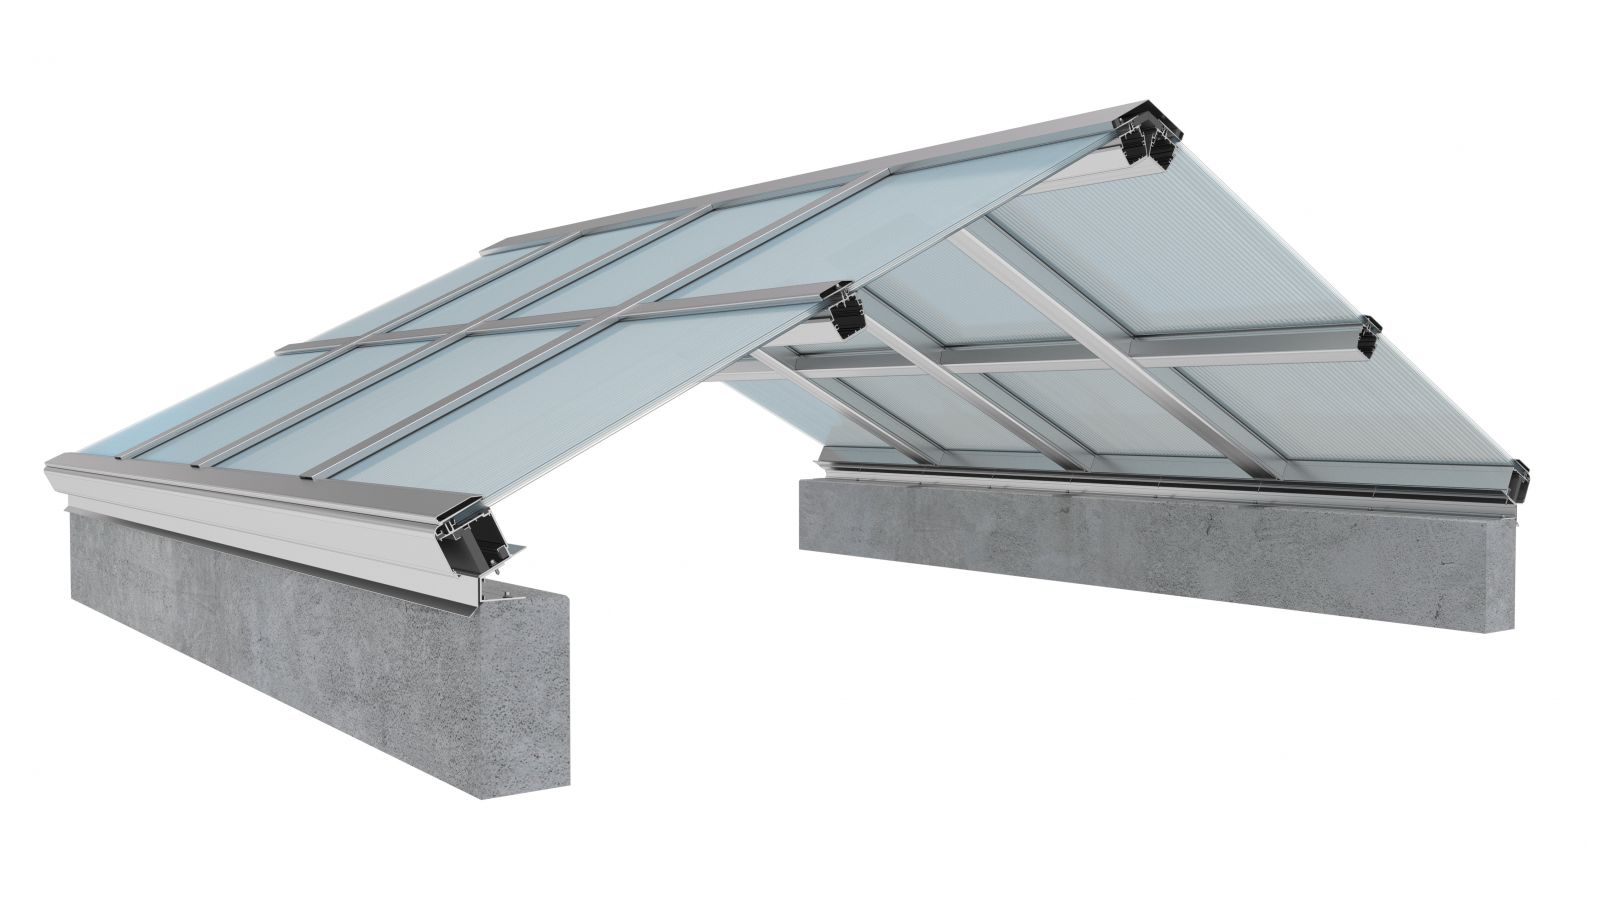 EXTECH\'s SKYGARD 3700 skylight spans large openings, including for industrial applications